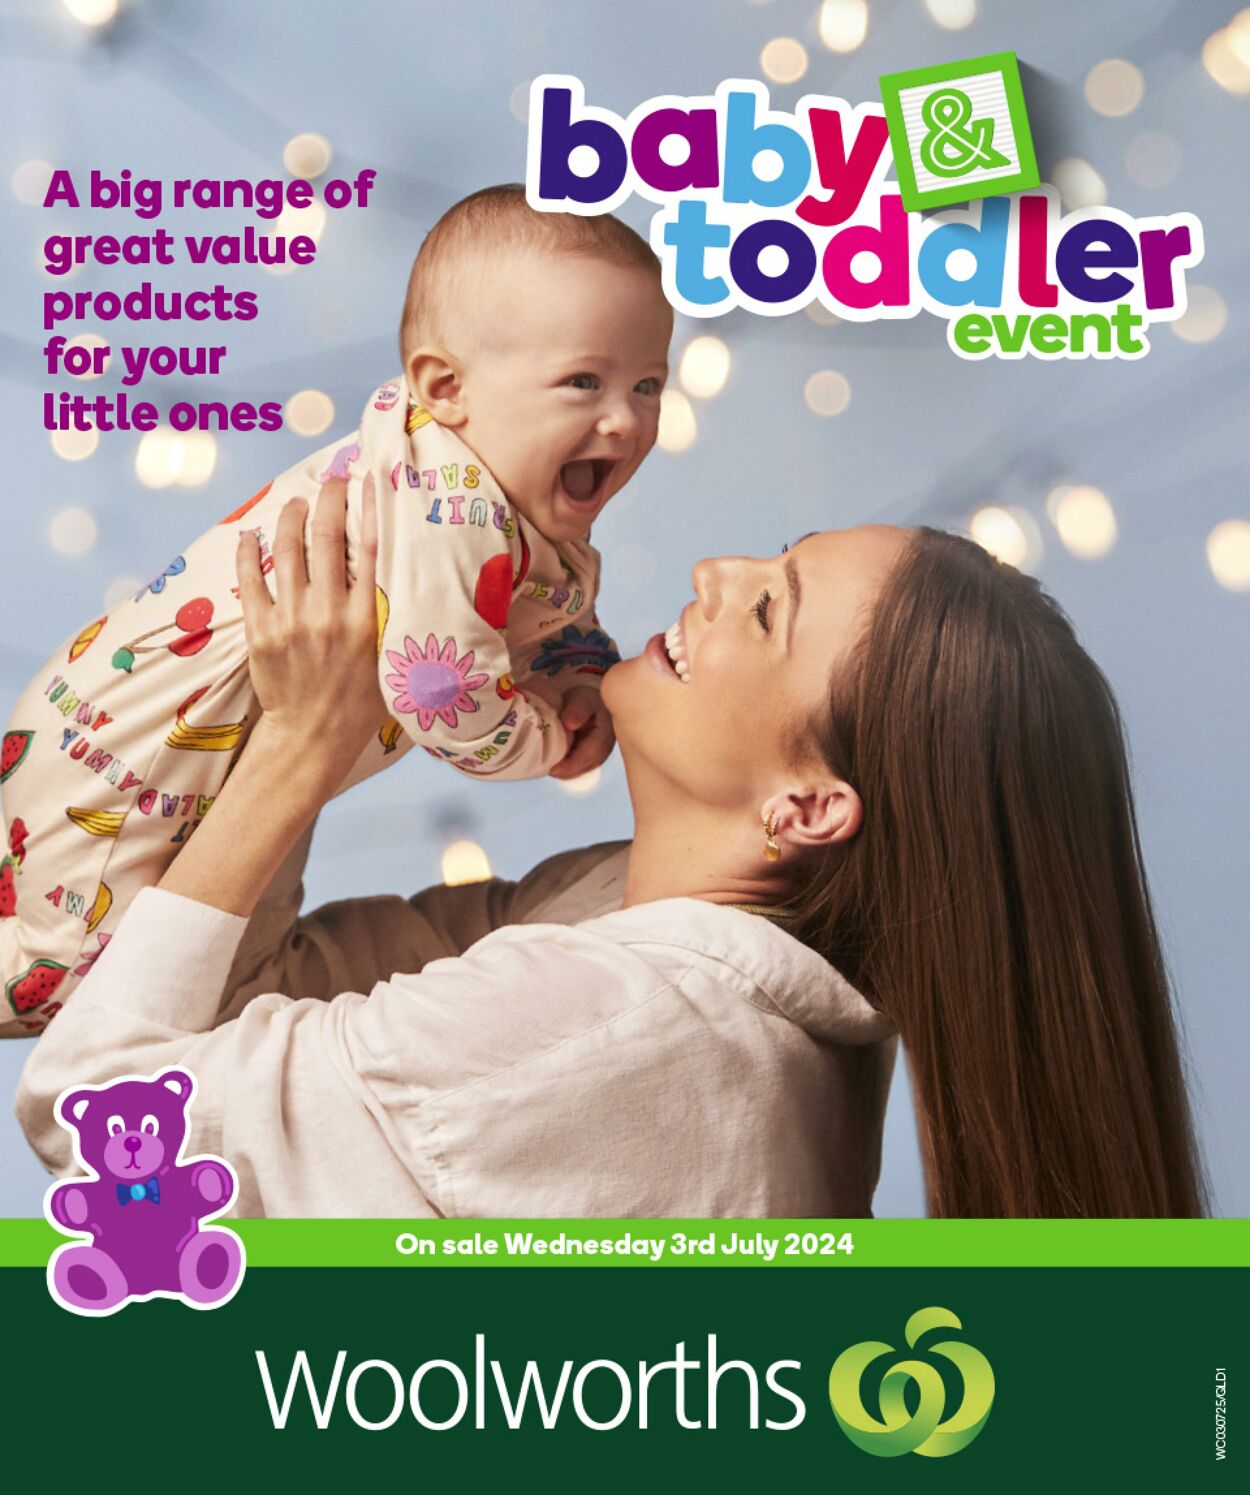 Catalogue Woolworths - Baby Toddler Event Catalogue QLD 3 Jul, 2024 - 9 Jul, 2024